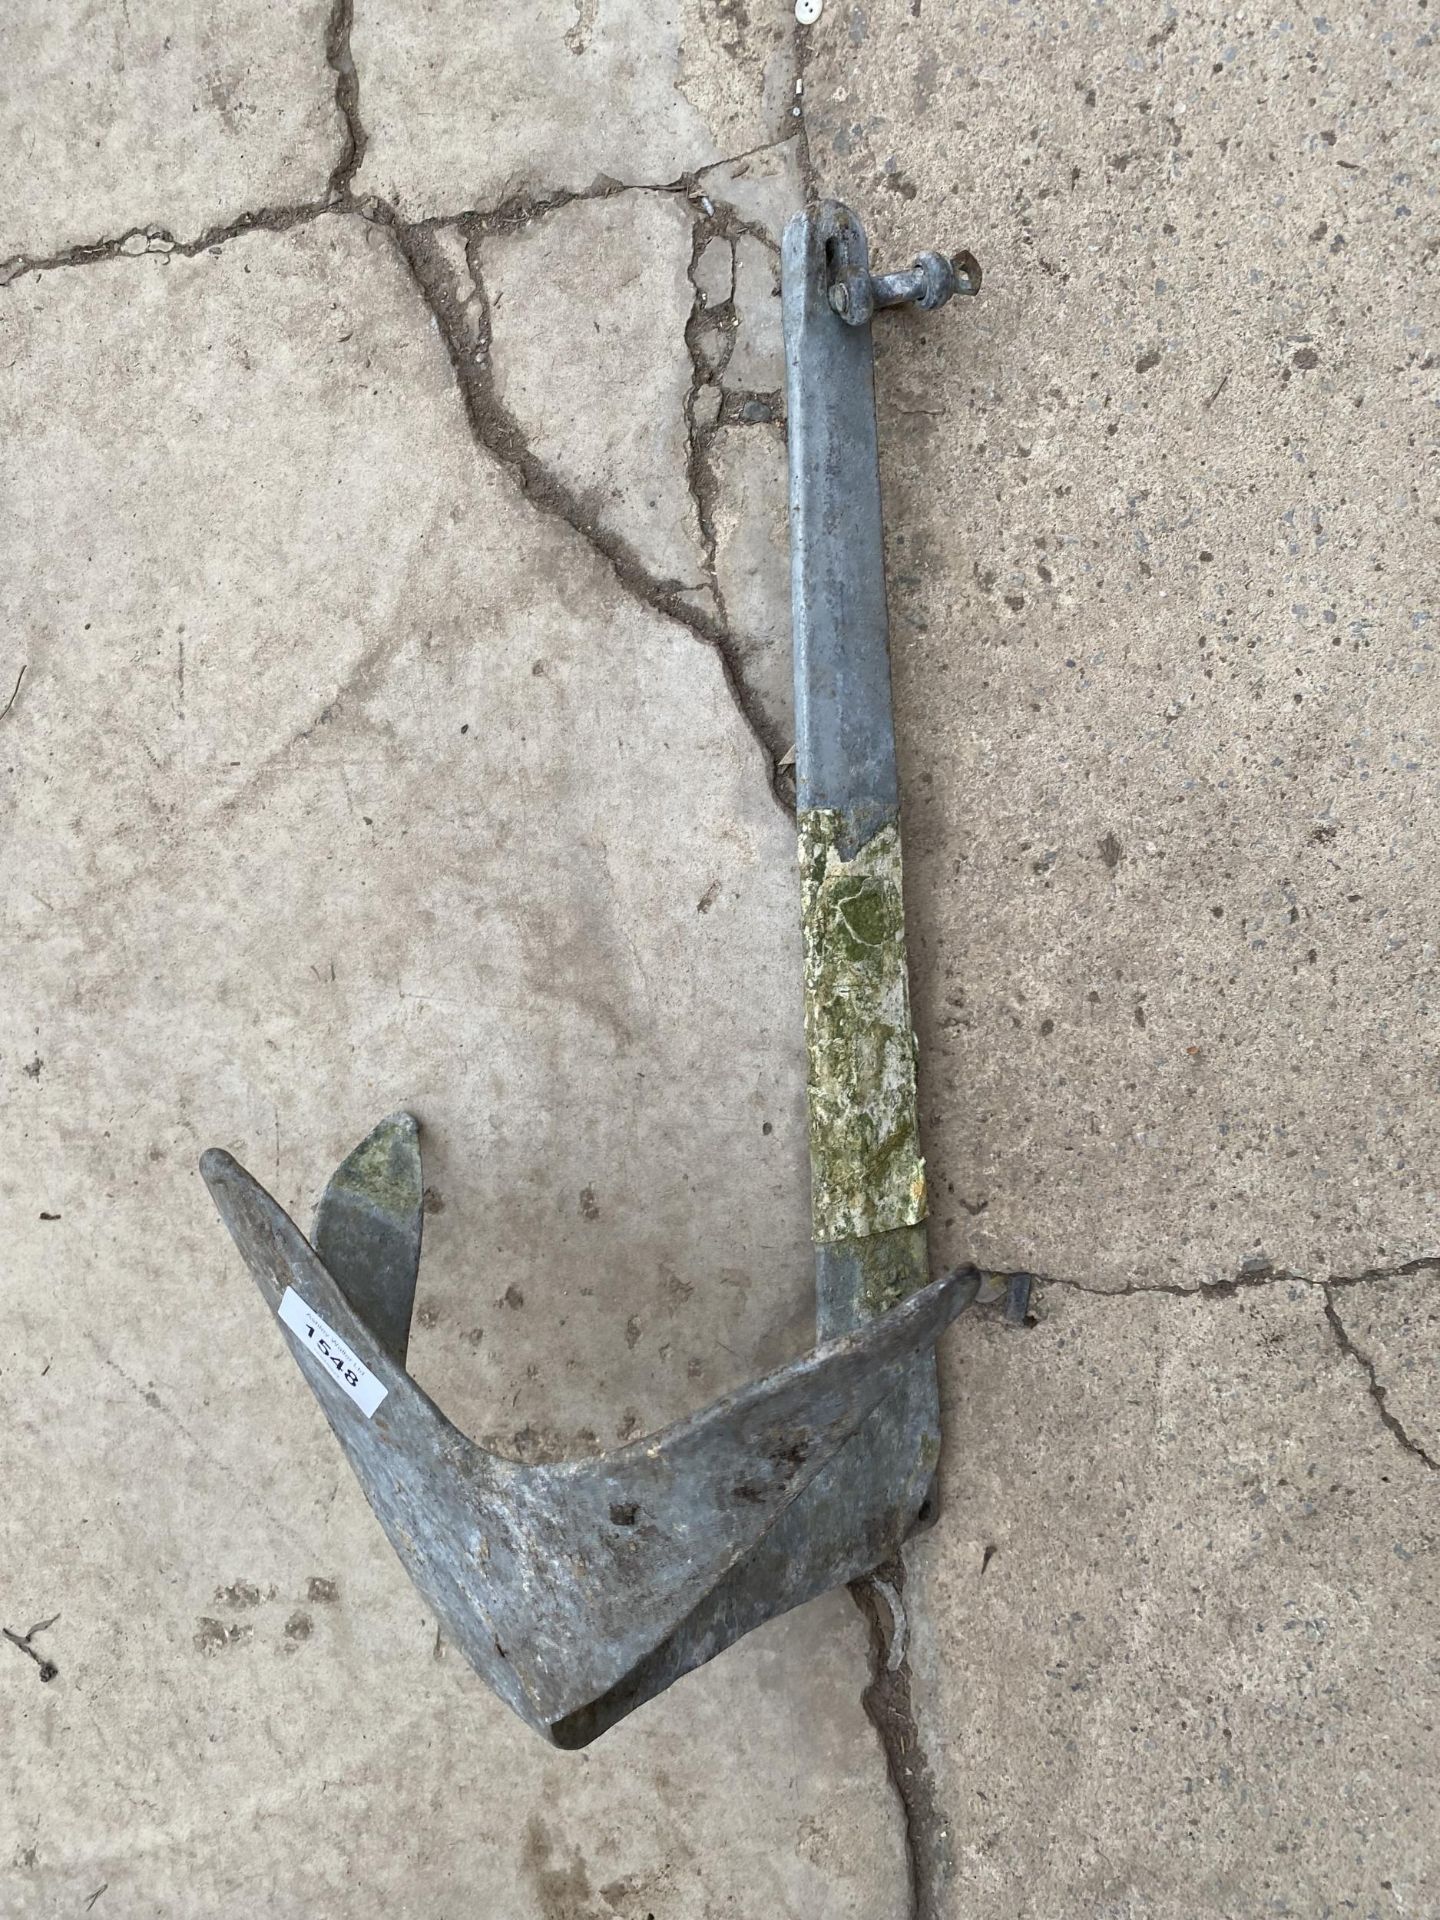 A METAL BOAT ANCHOR